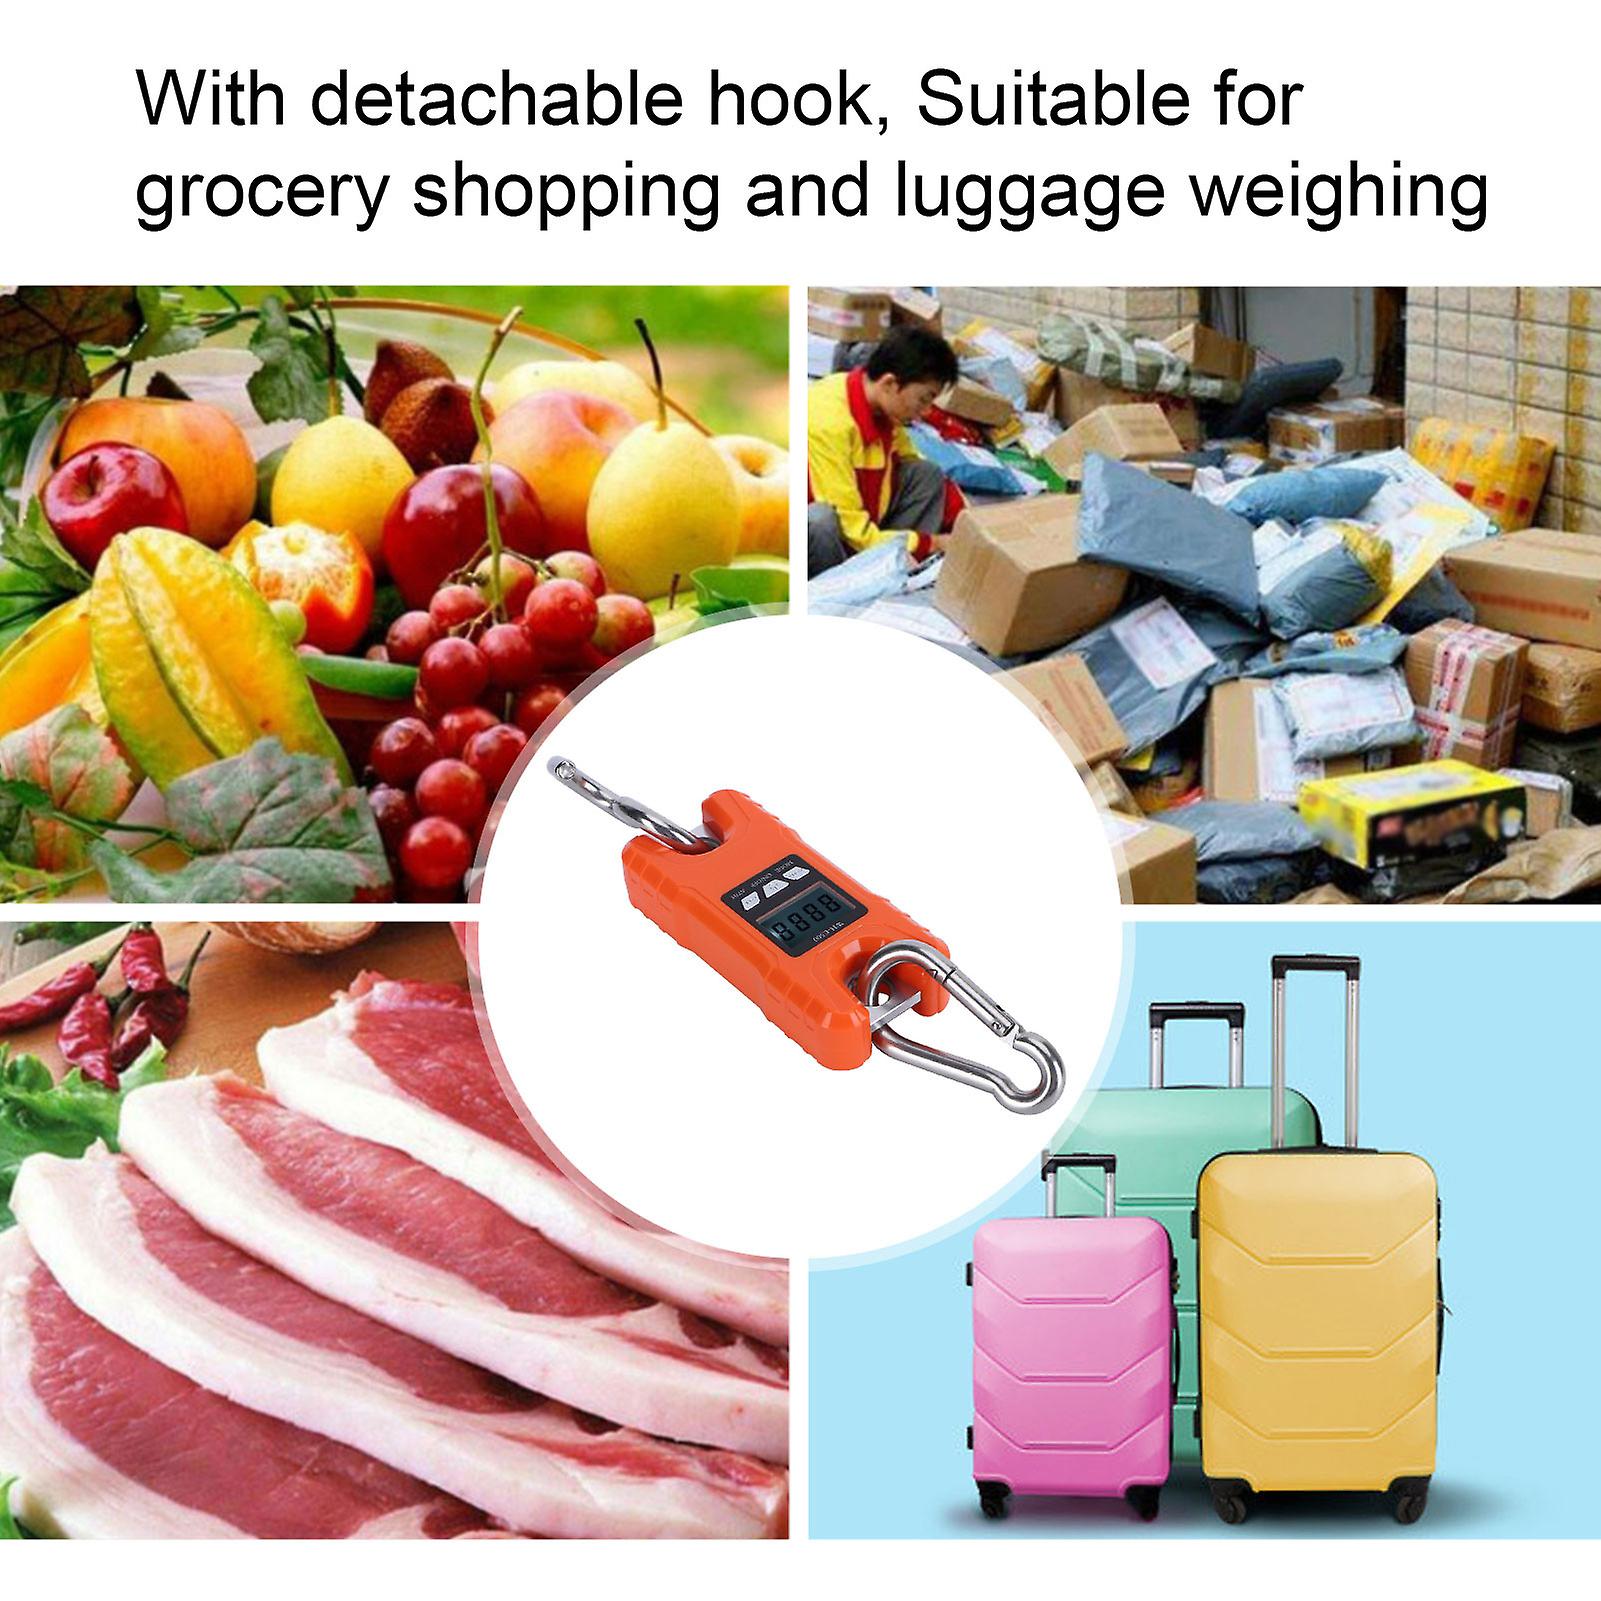 Digital Hanging Scale For Weighting， Fish Scale Portable Electronic Hanging Hook Scales With Led Display For Travle Fishing Tackle Bag Luggage[orange]